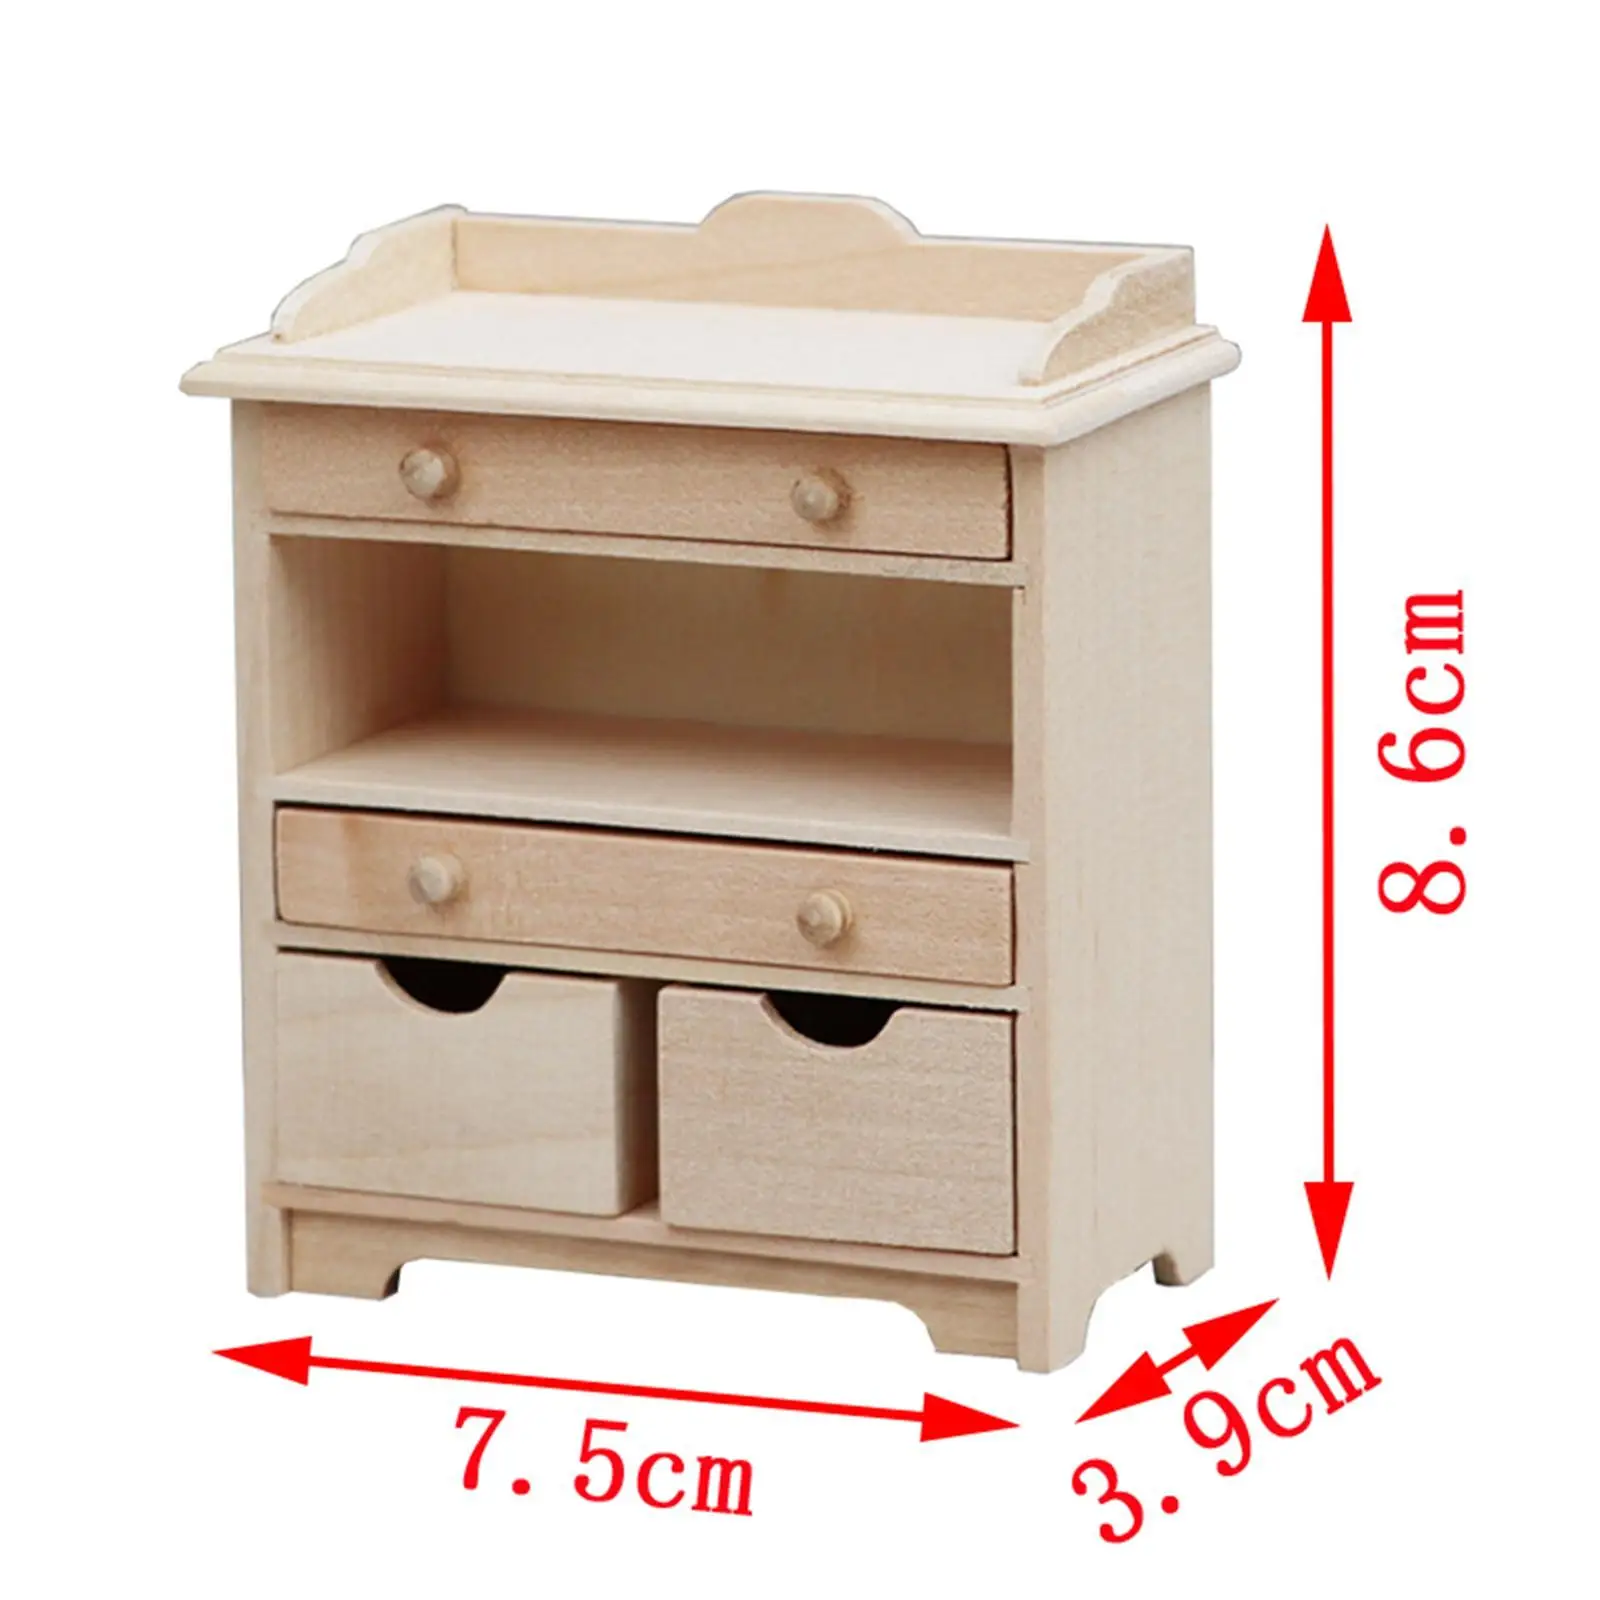 1:12 Dollhouse NightStand Wooden Furniture for Accessories DIY Projects